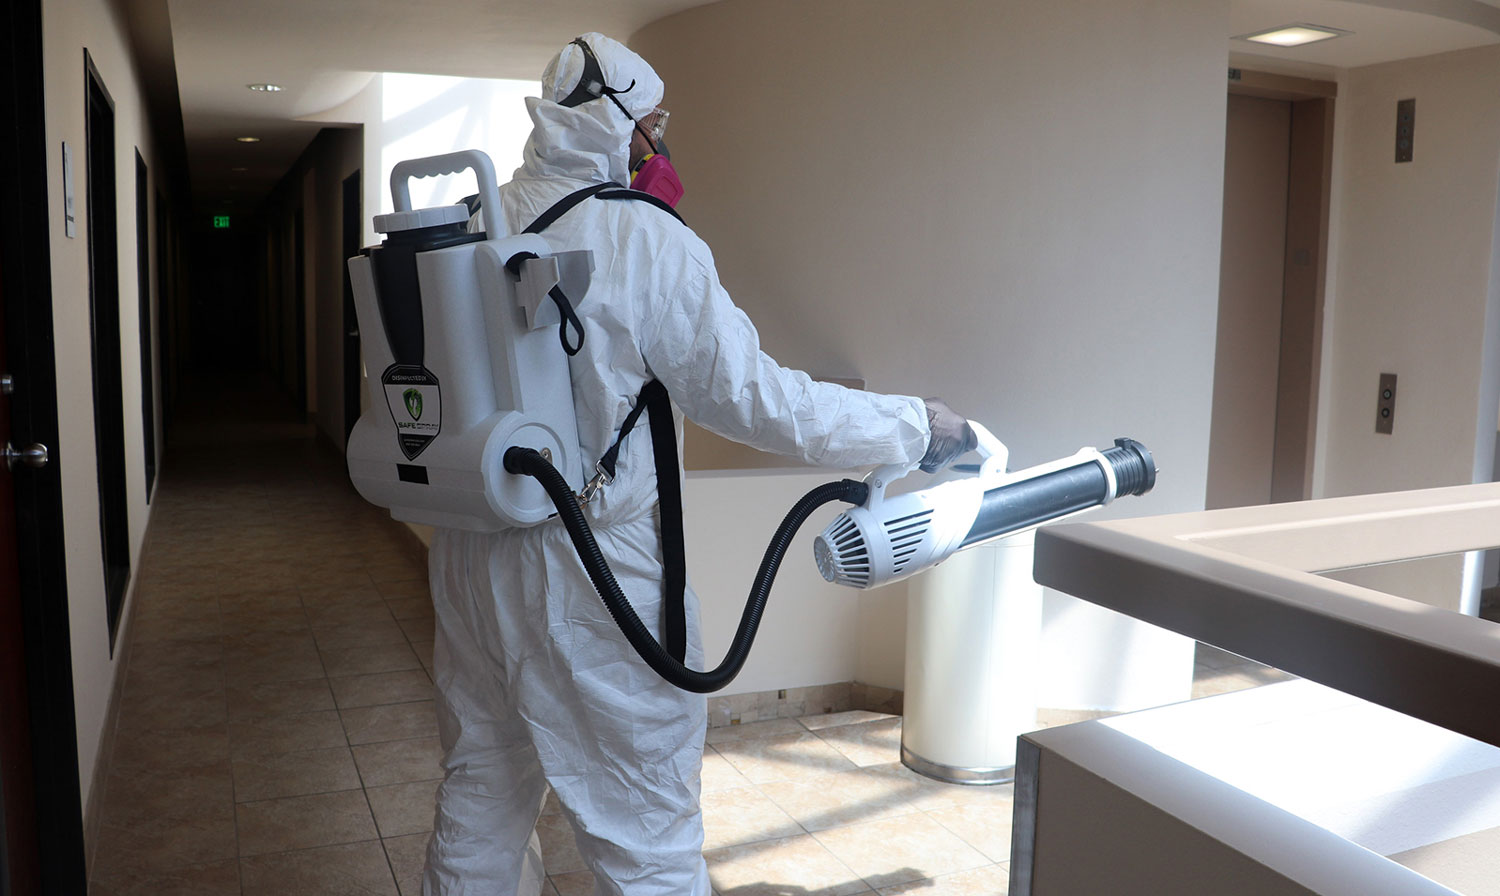 Benefits of Disinfecting with Electrostatic Sprayers